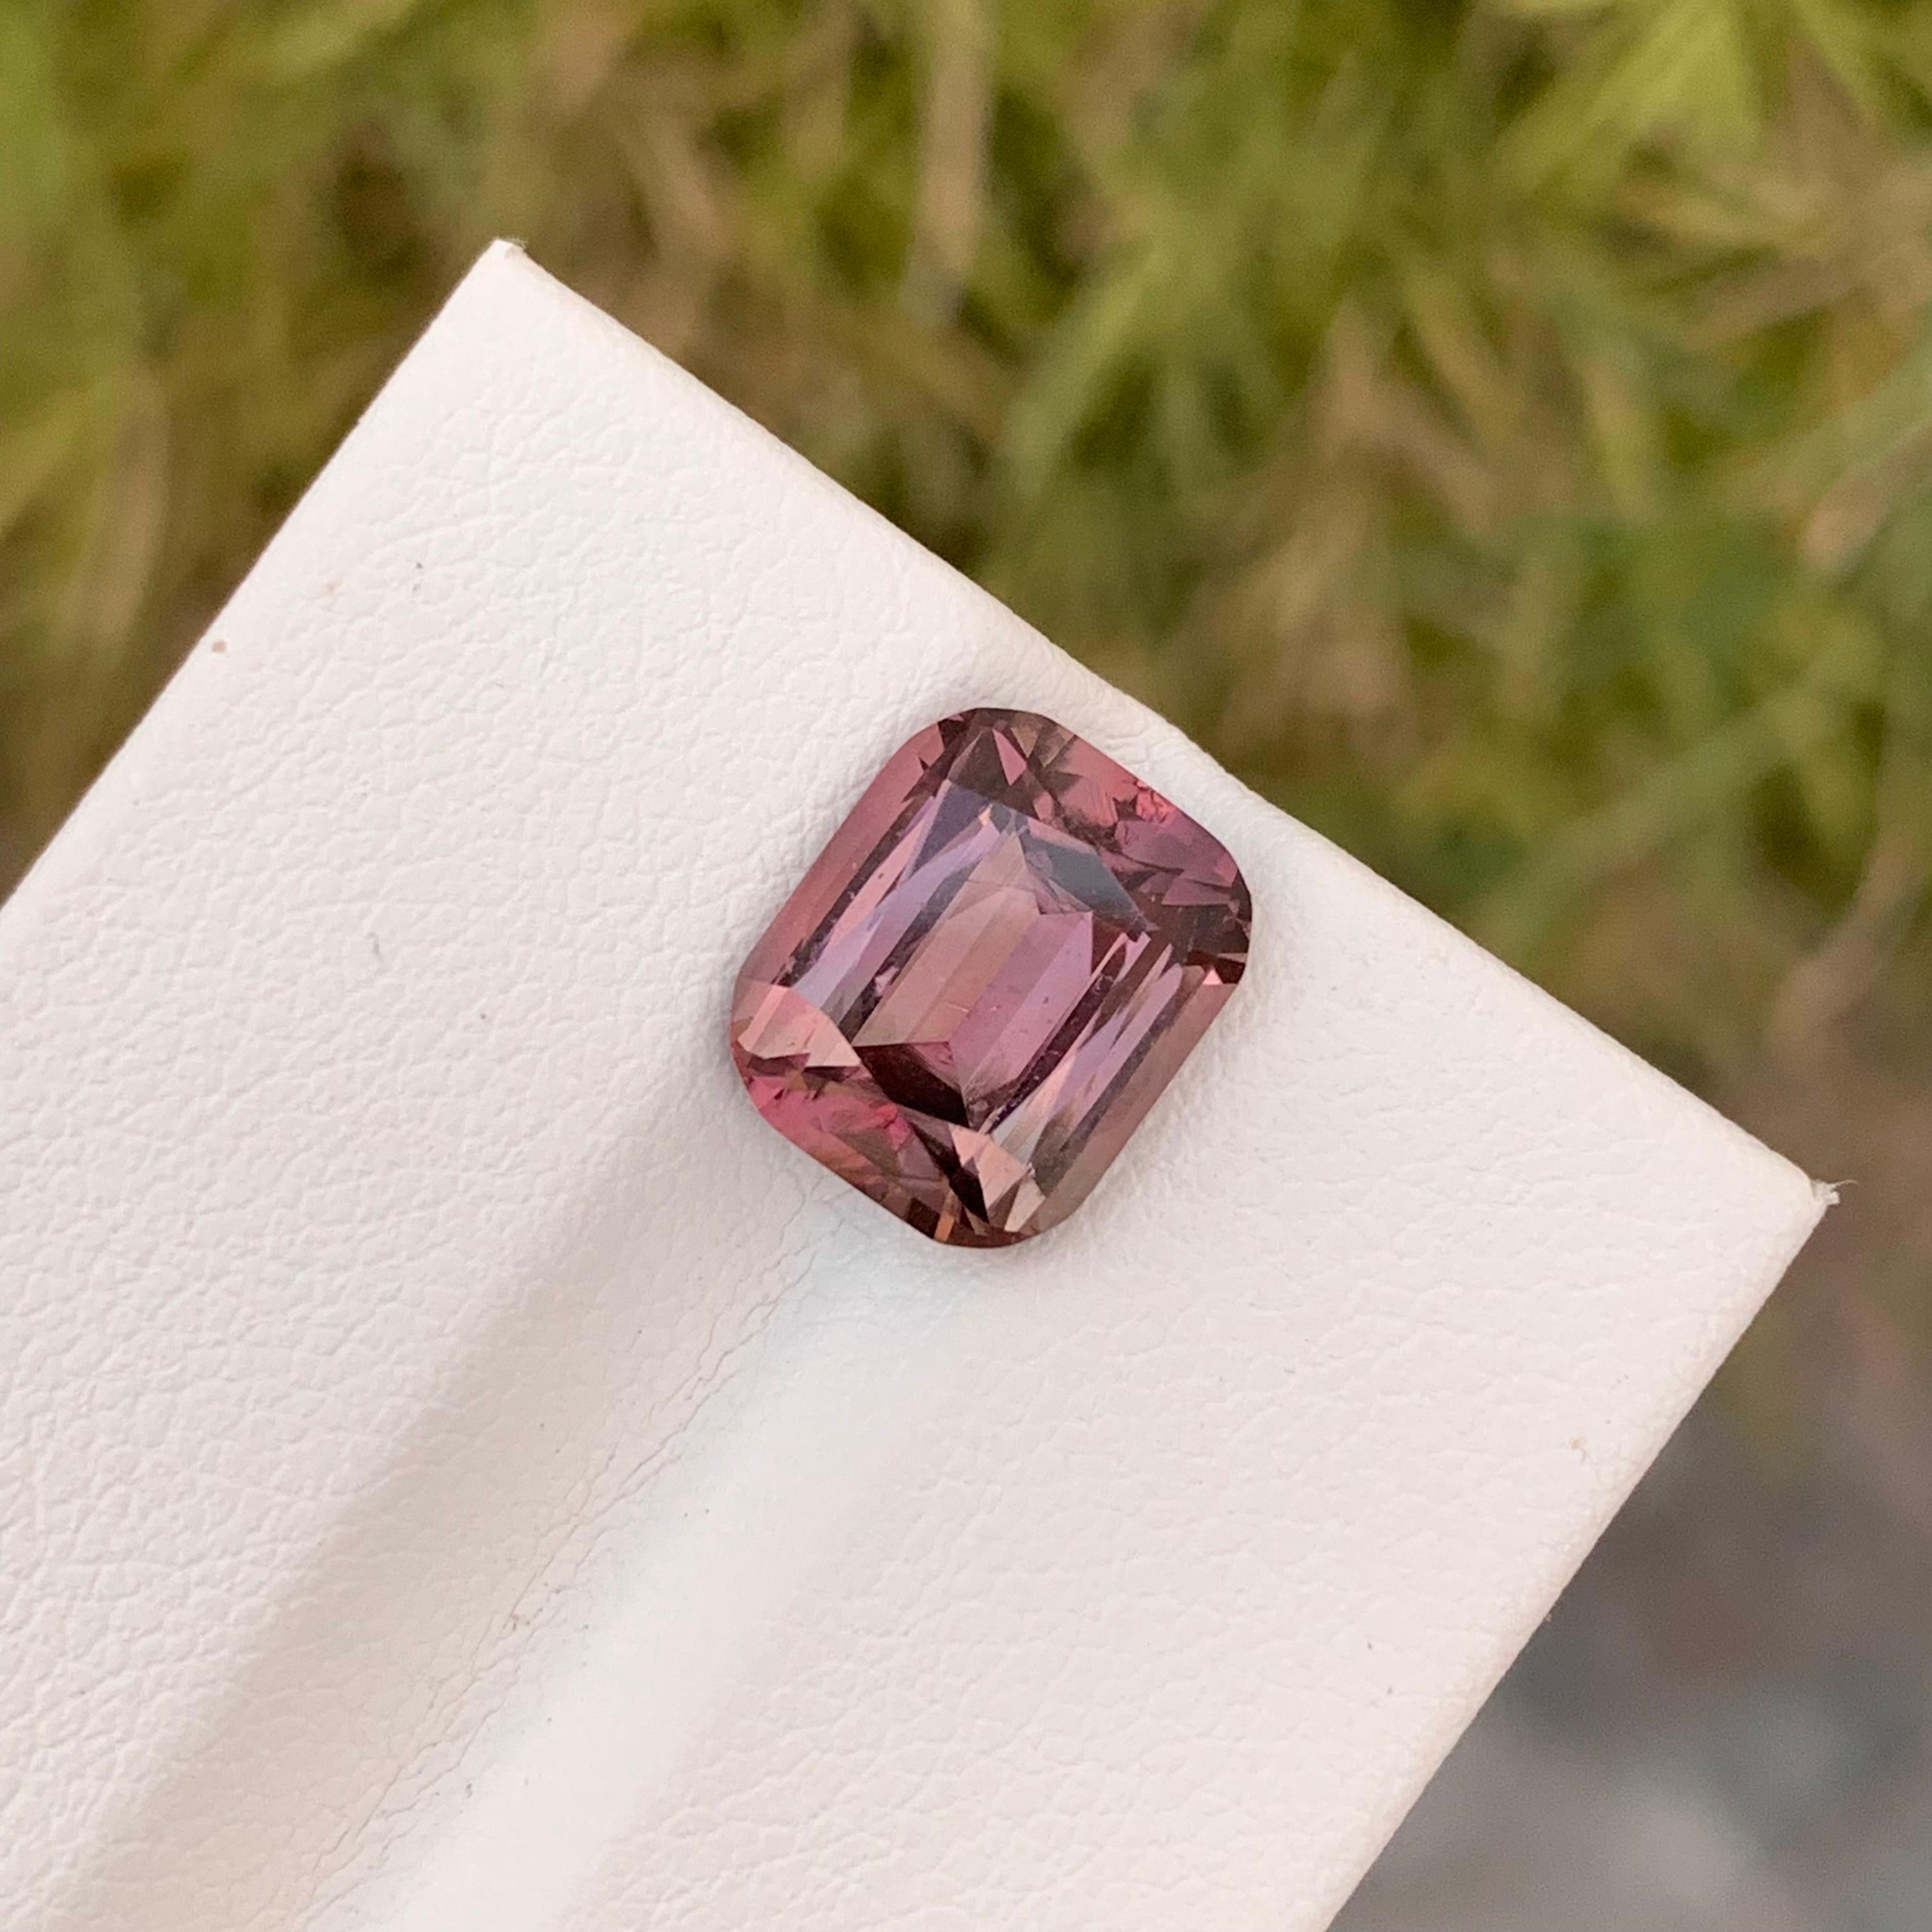 3.75 Carat Pretty Loose Peach Pink Tourmaline Cushion Shape Gem From Afghanistan For Sale 2